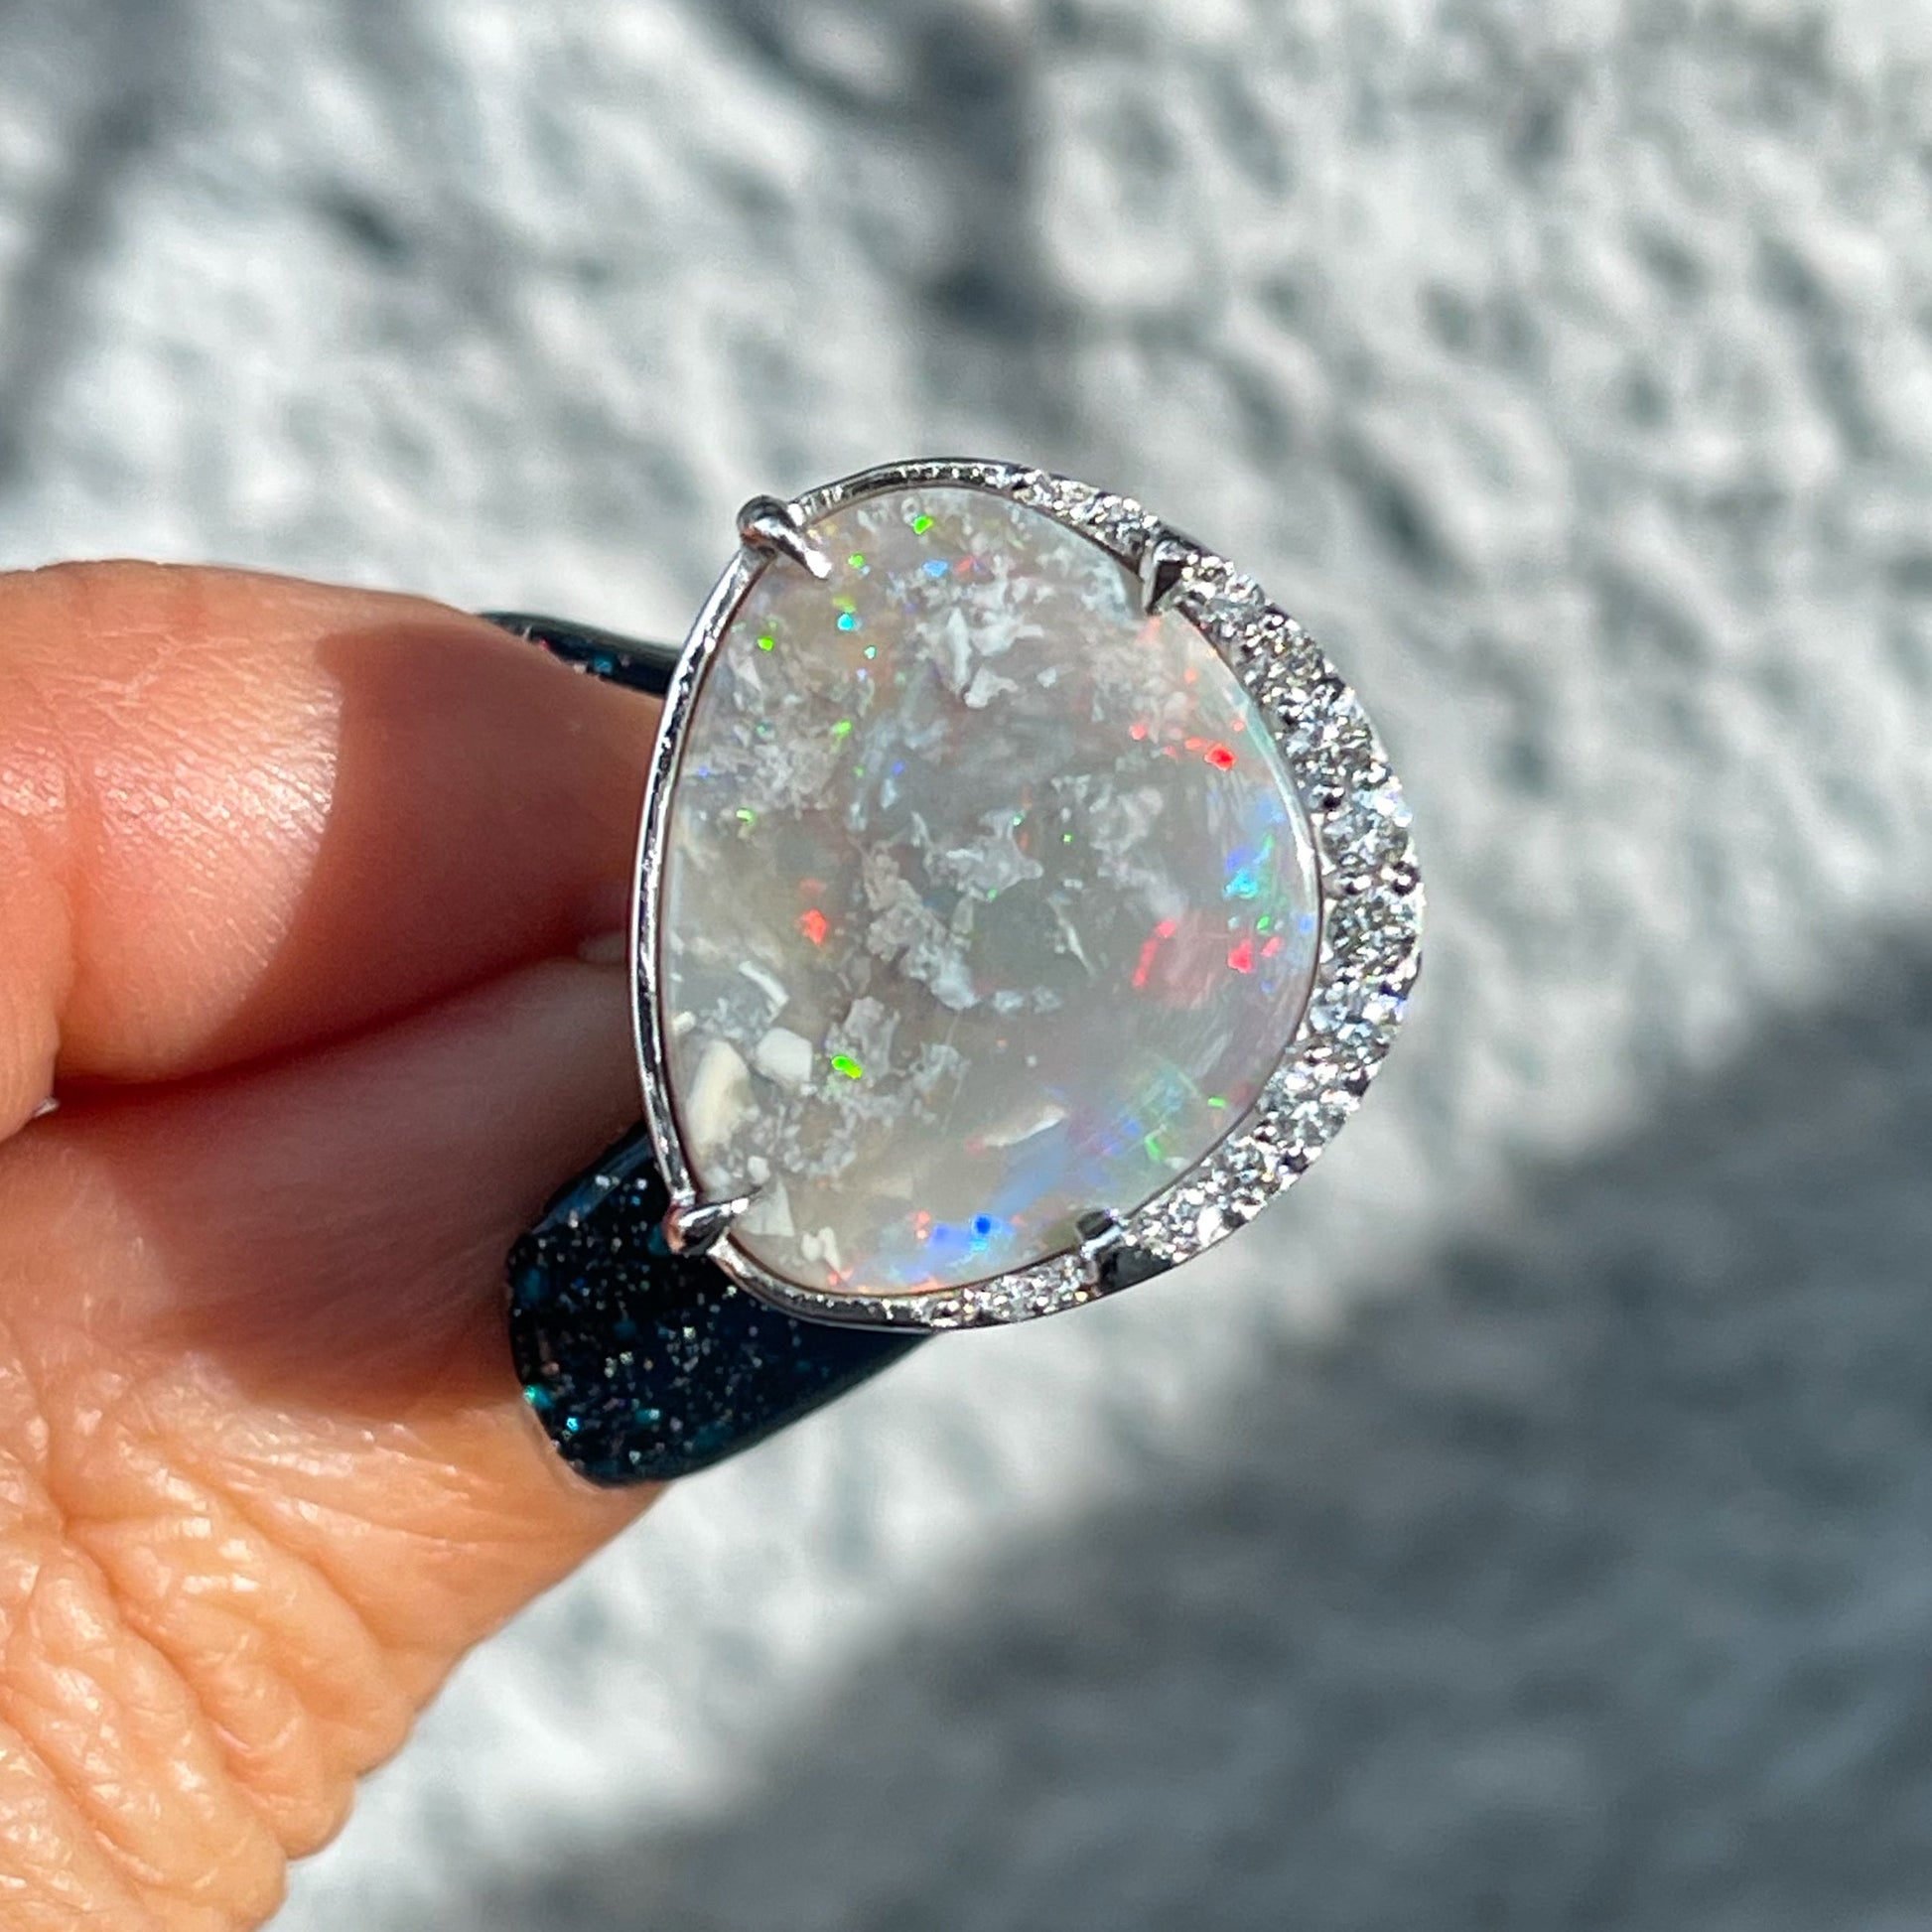 An Australian Opal Ring by NIXIN Jewelry with a large opal stone set in white gold with diamonds.